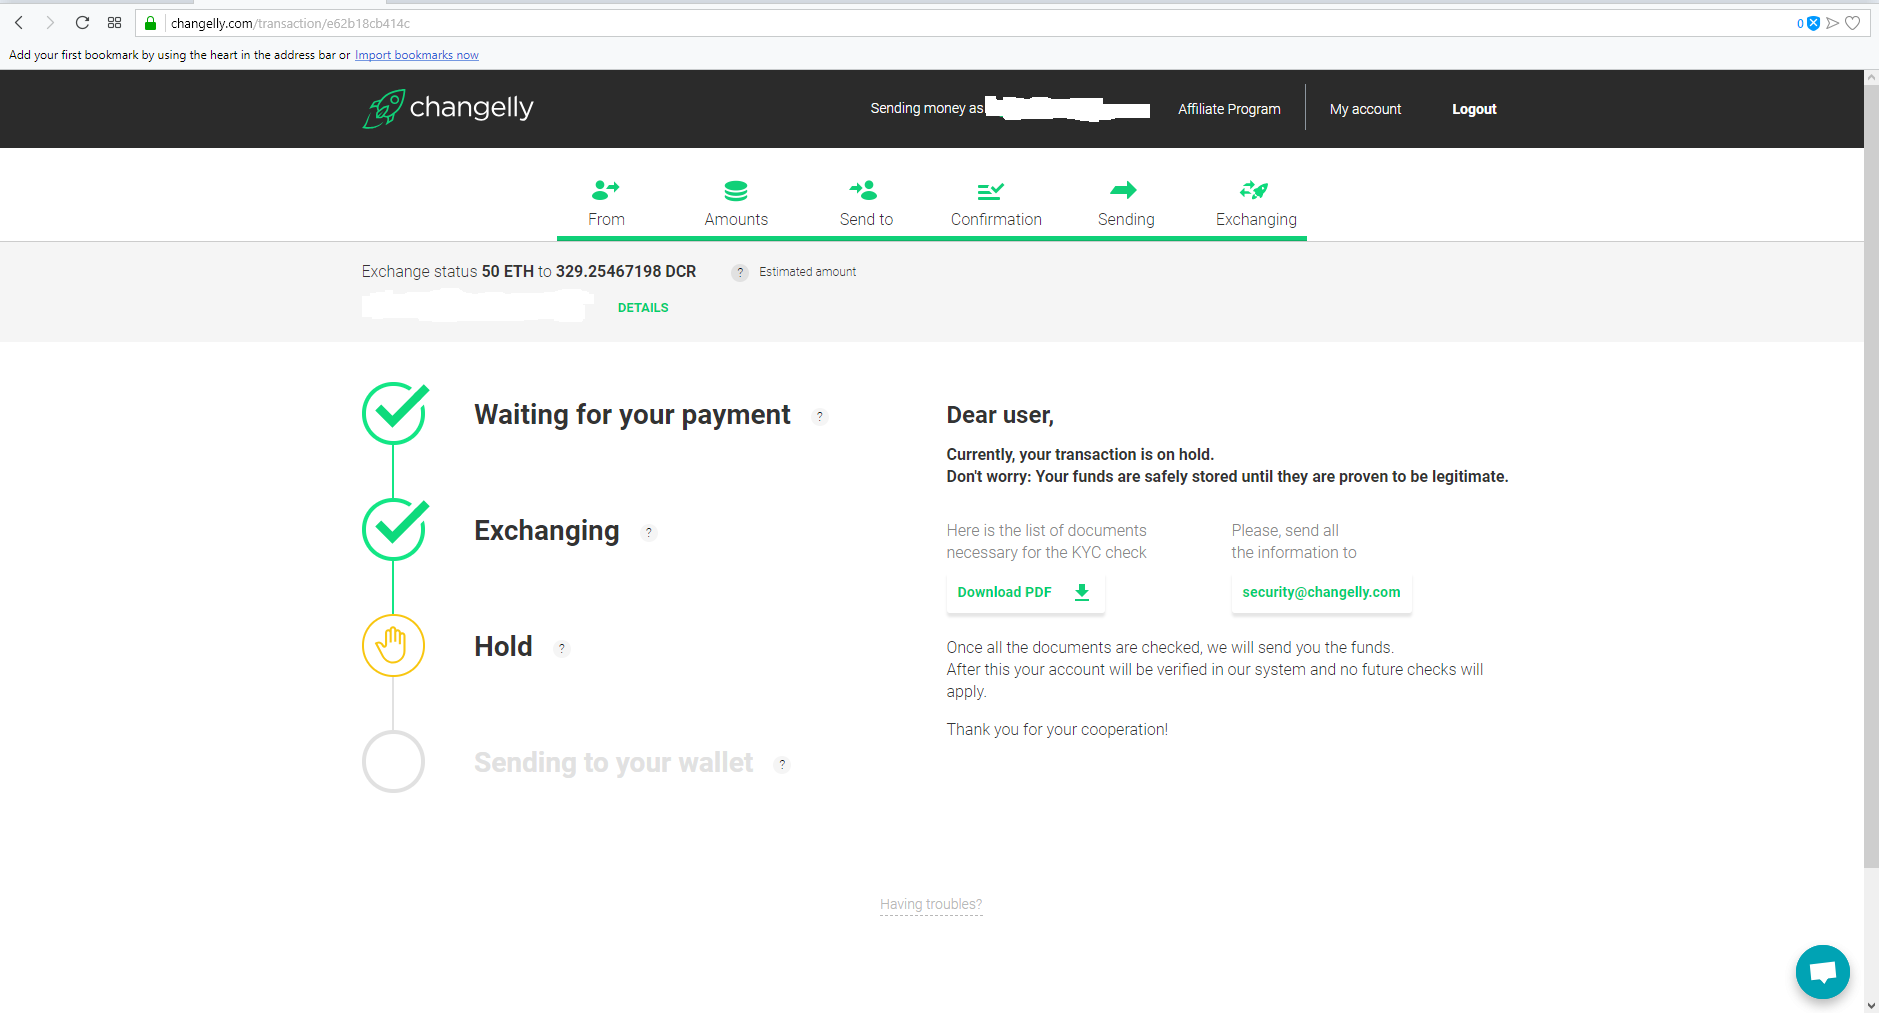 Changelly Holding The Payment & Never Giving Back